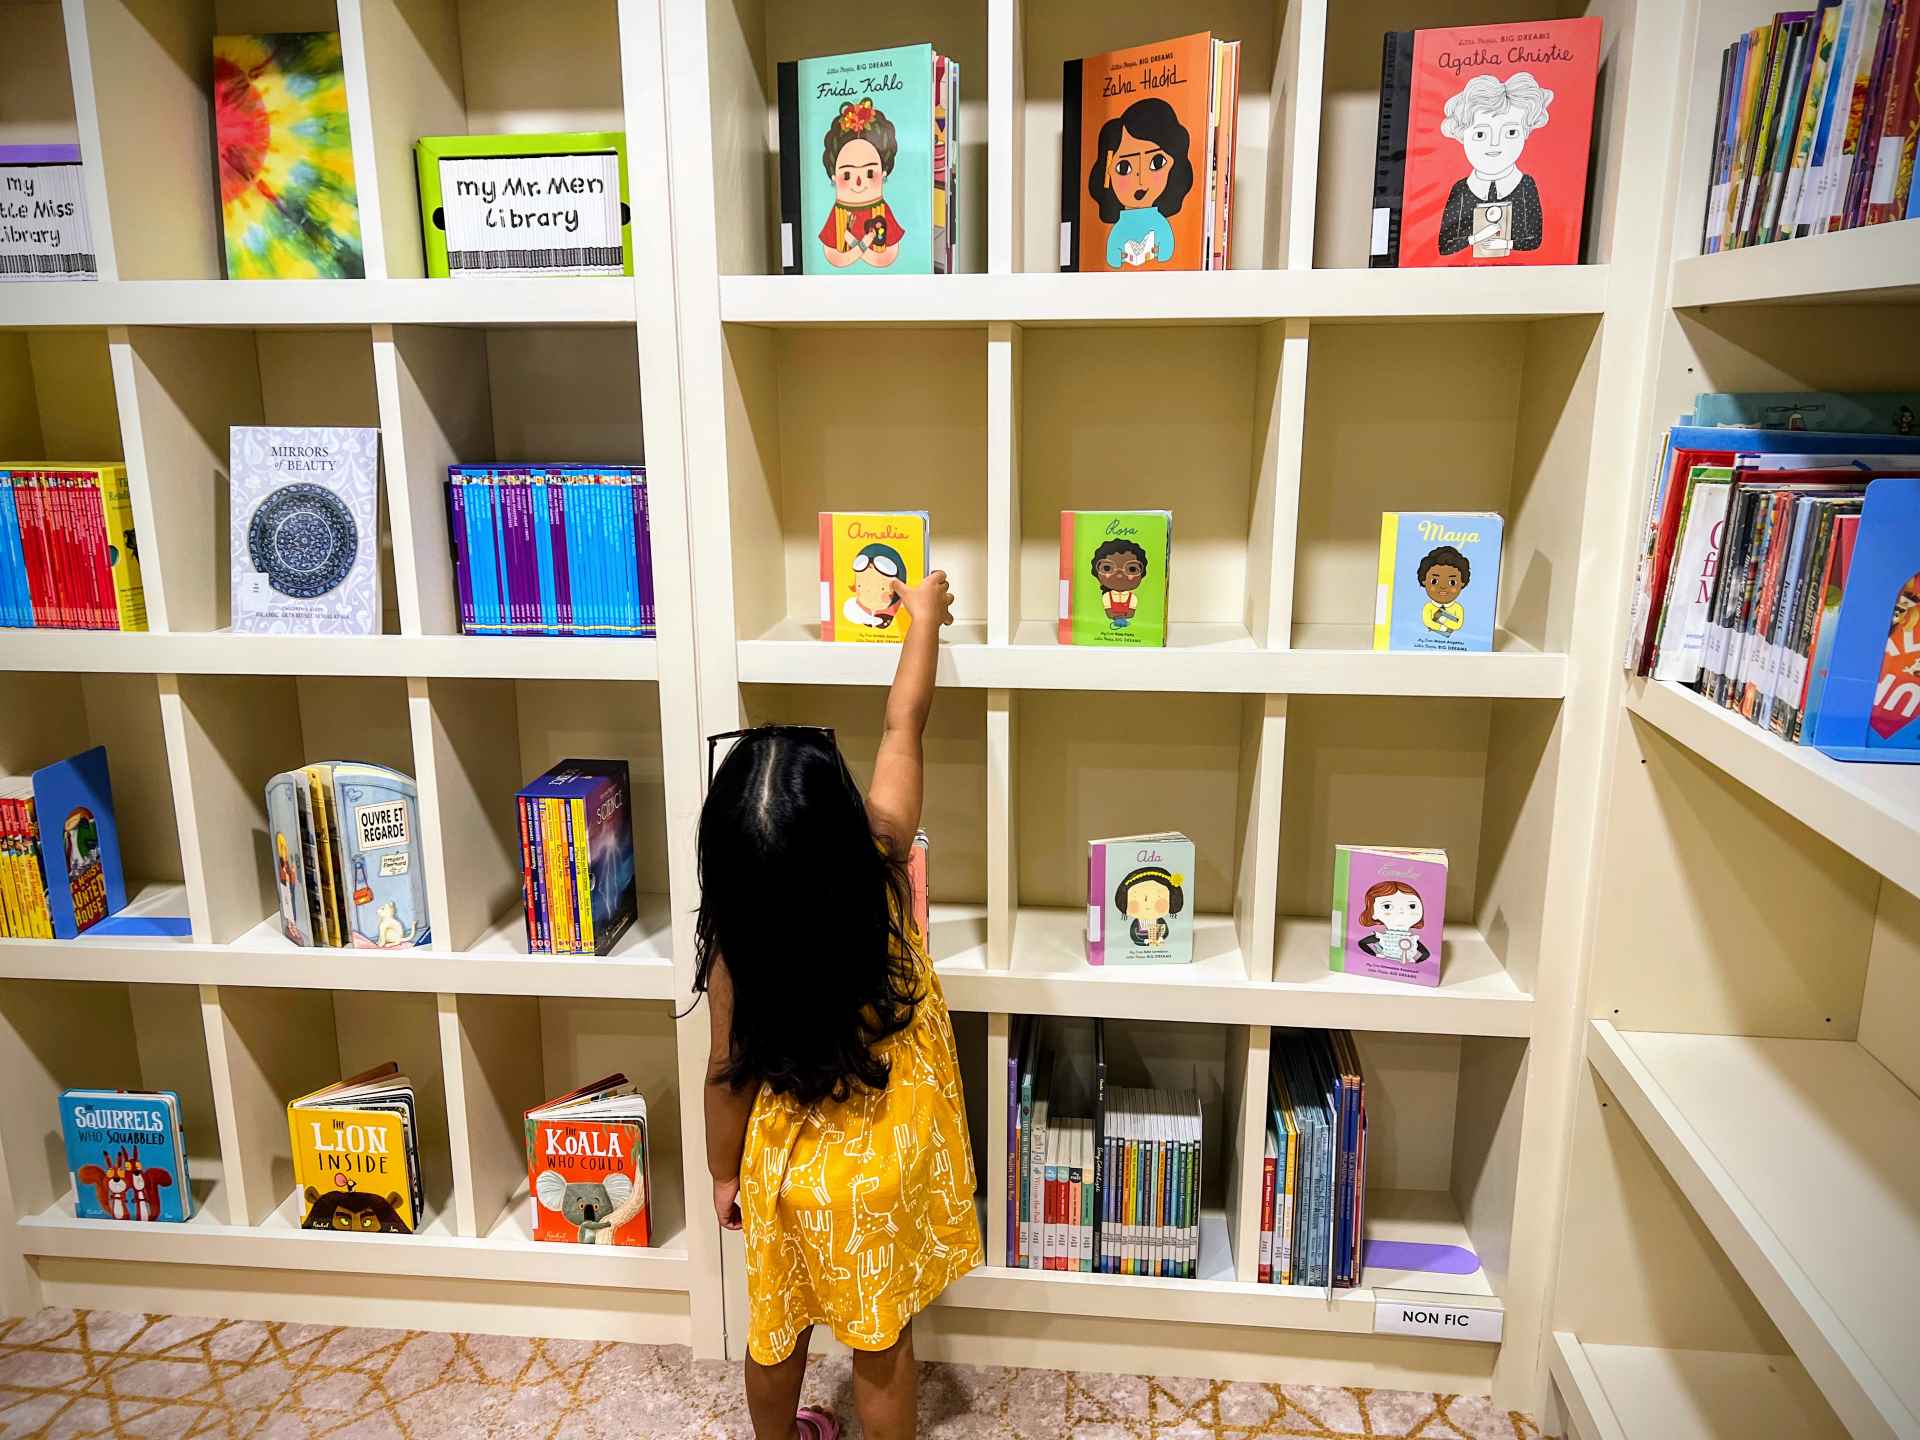 A toddler in Malaysia with family reaches for a book in a library.